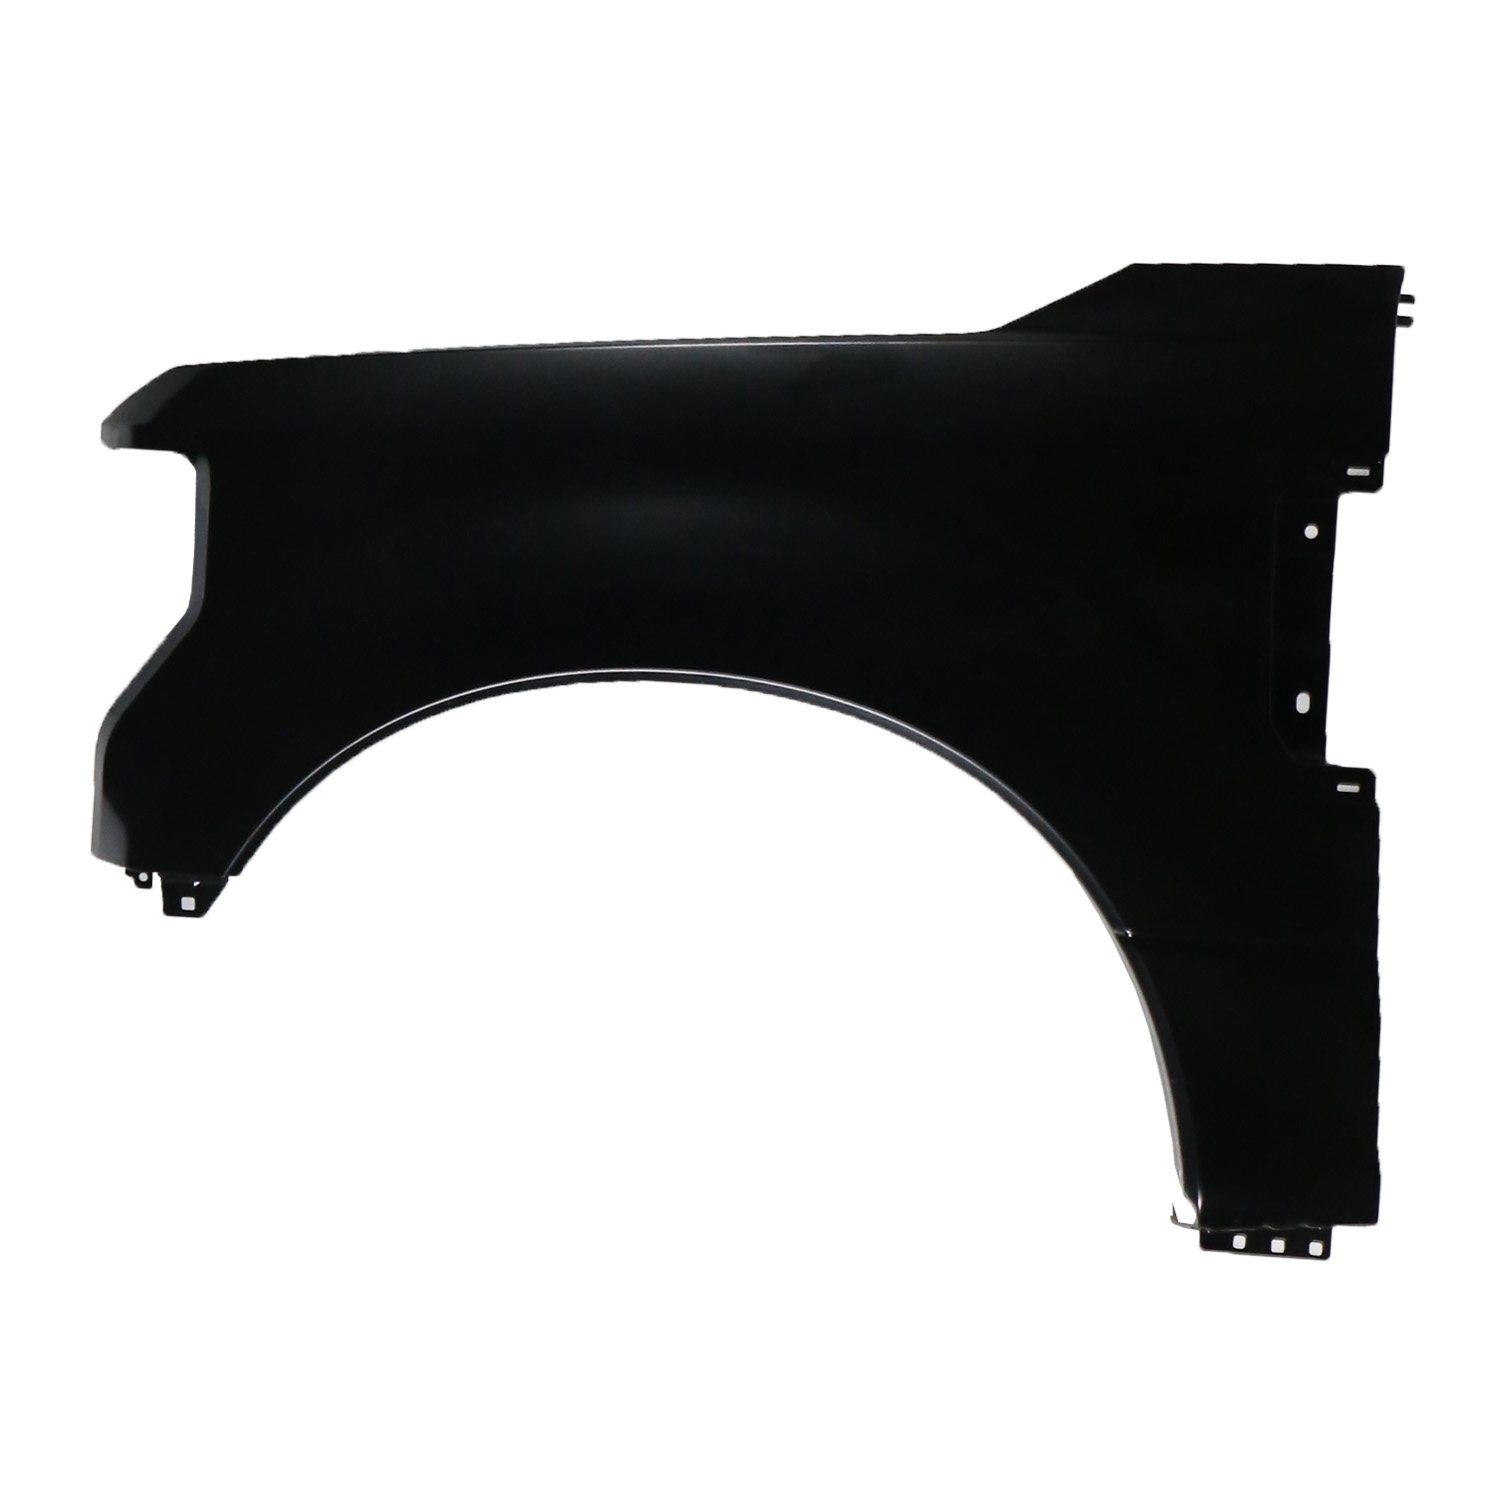 Aftermarket FENDERS for FORD - F-250 SUPER DUTY, F-250 SUPER DUTY,17-19,LT Front fender assy